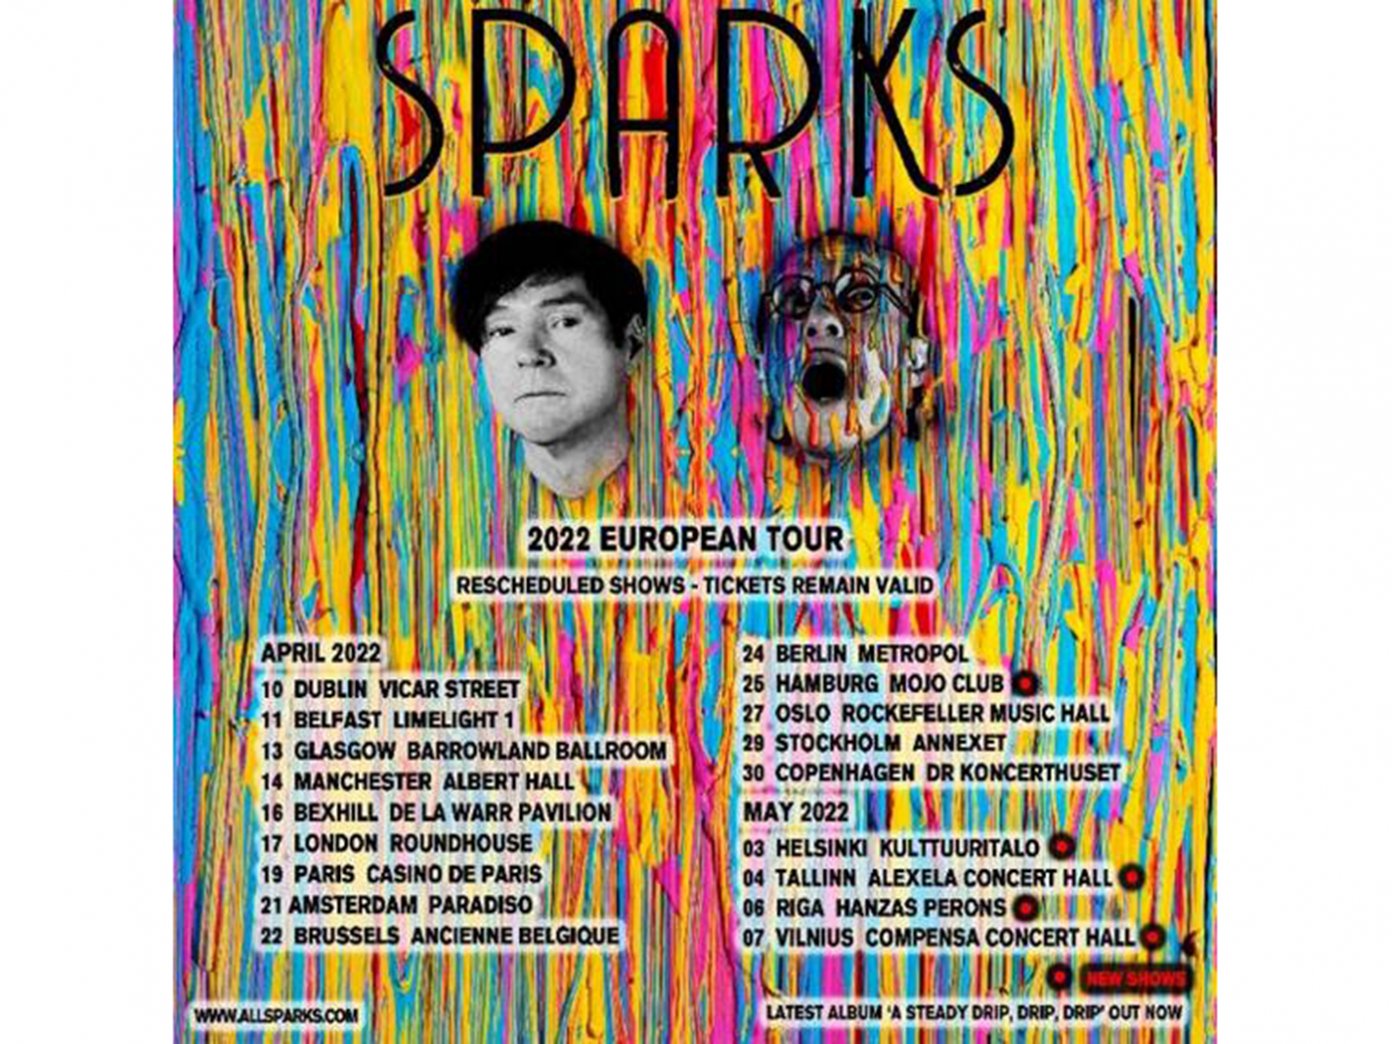 Sparks announce rescheduled European tour, with extra shows UNCUT